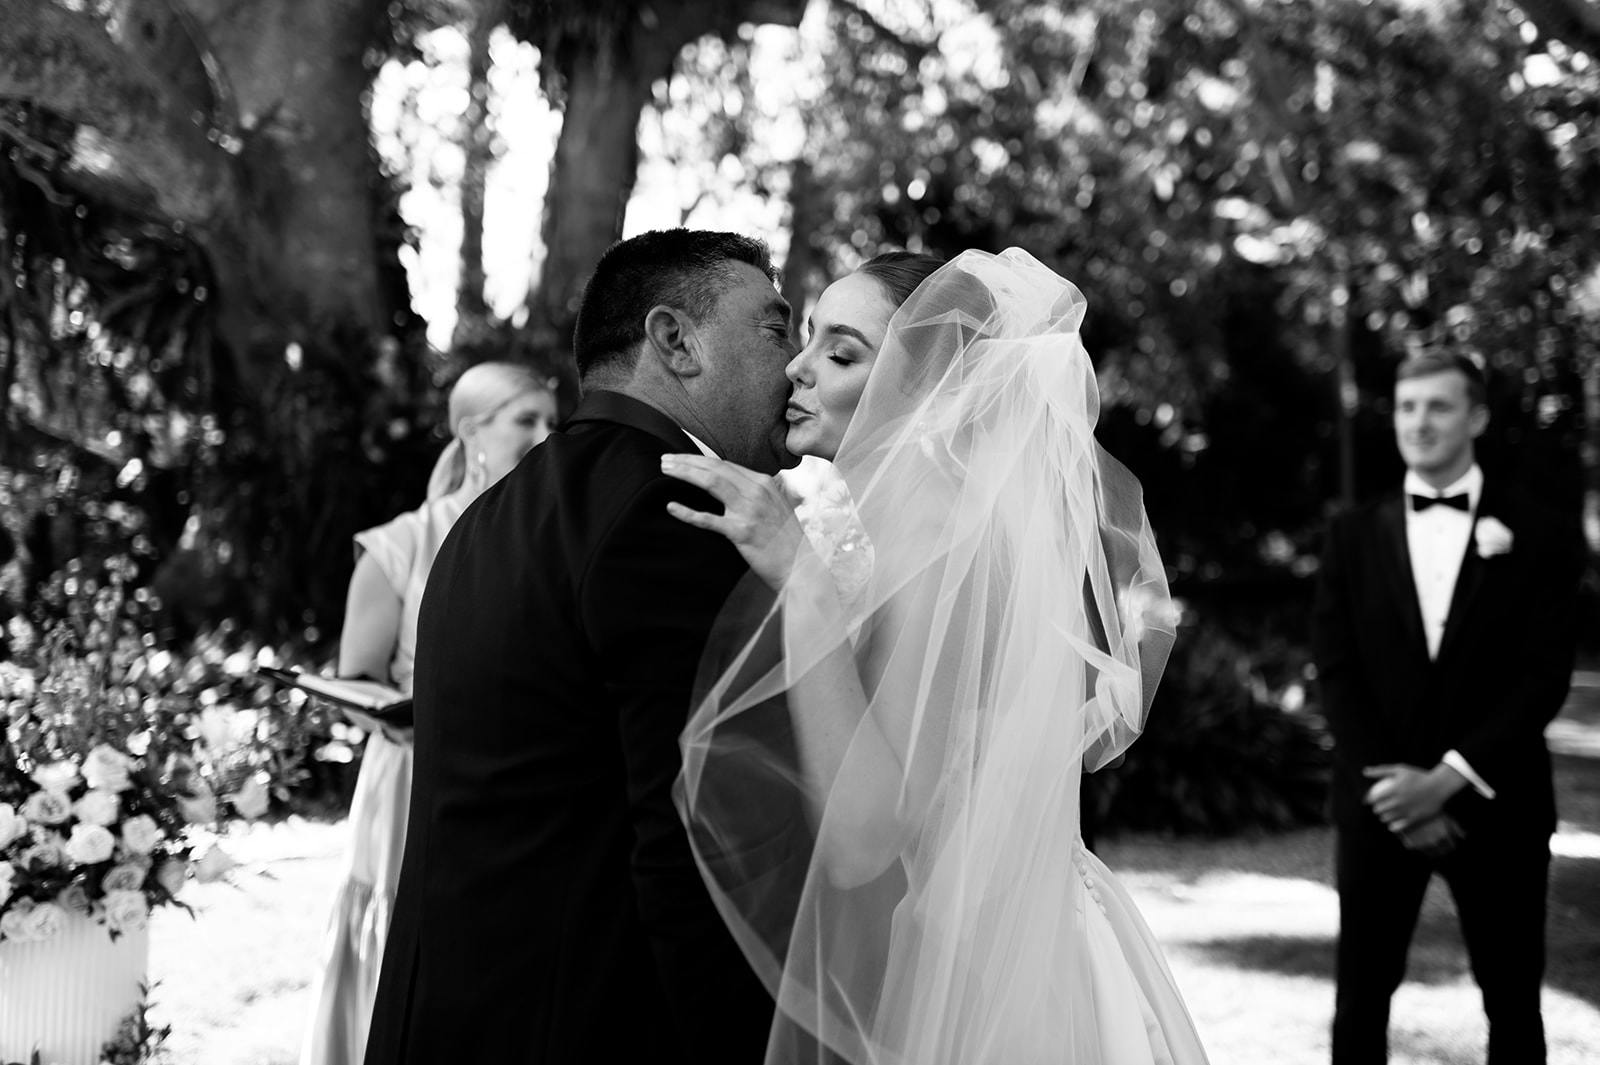 A bride and groom share an emotional embrace and kiss during their outdoor wedding ceremony. The bride is wearing a veil and the groom is dressed in a suit. Bridesmaids and groomsmen stand in the background surrounded by greenery and floral arrangements.